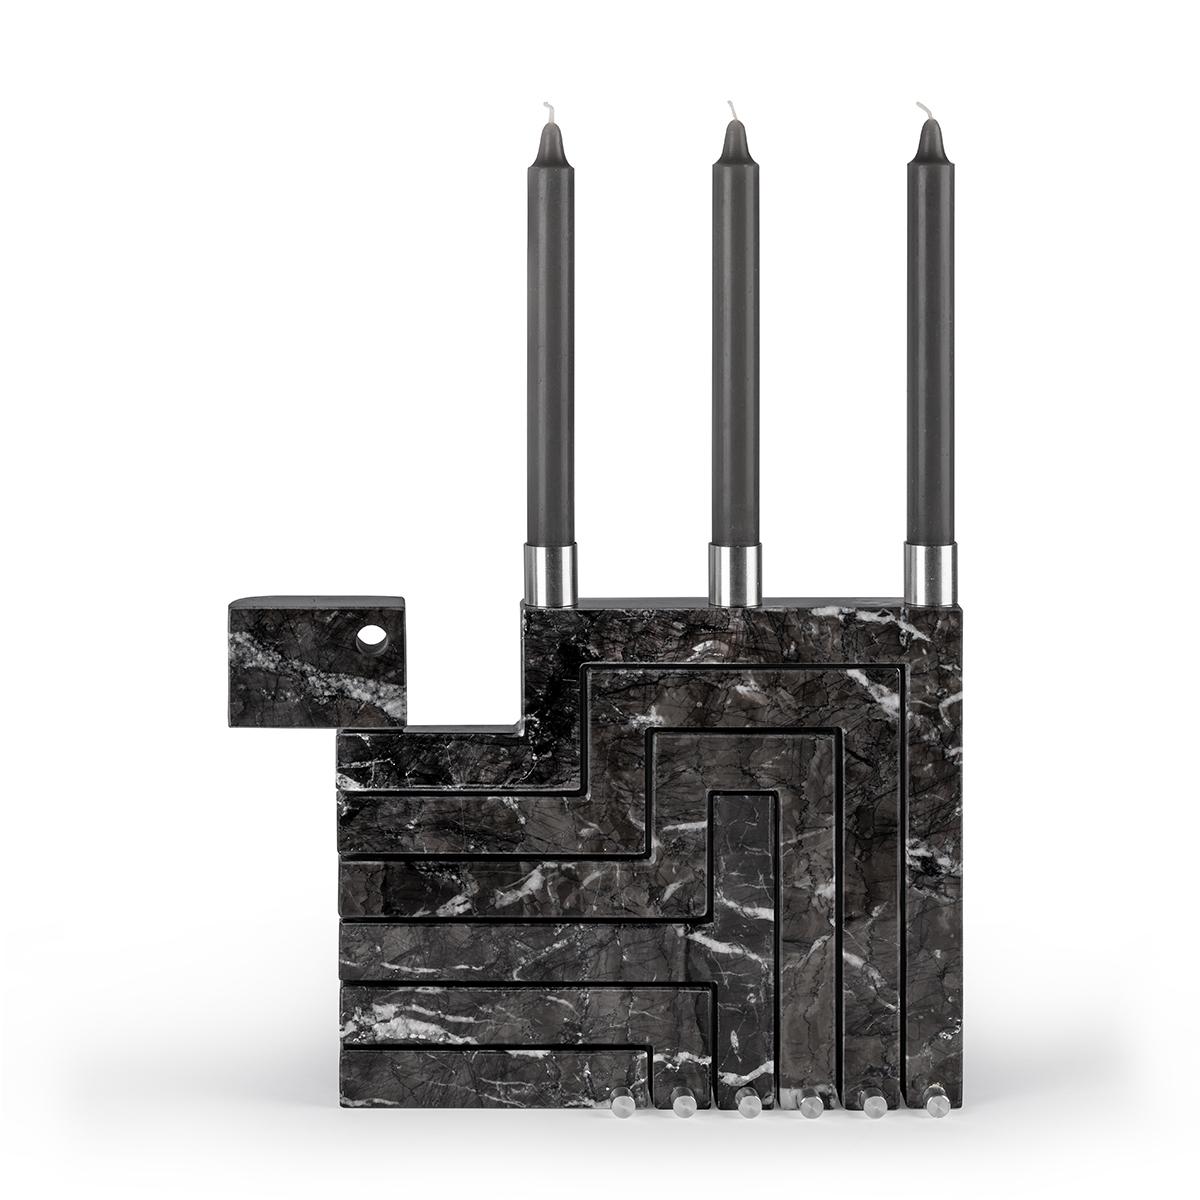 The Vestalia Black Marble Grigio Carnico and Chrome Details Candleholder is a unique and eye-catching sculptural piece.
When it is closed, the candelabrum appears like a monolithic marble slab. With just a few small touches, however, Vestalia opens